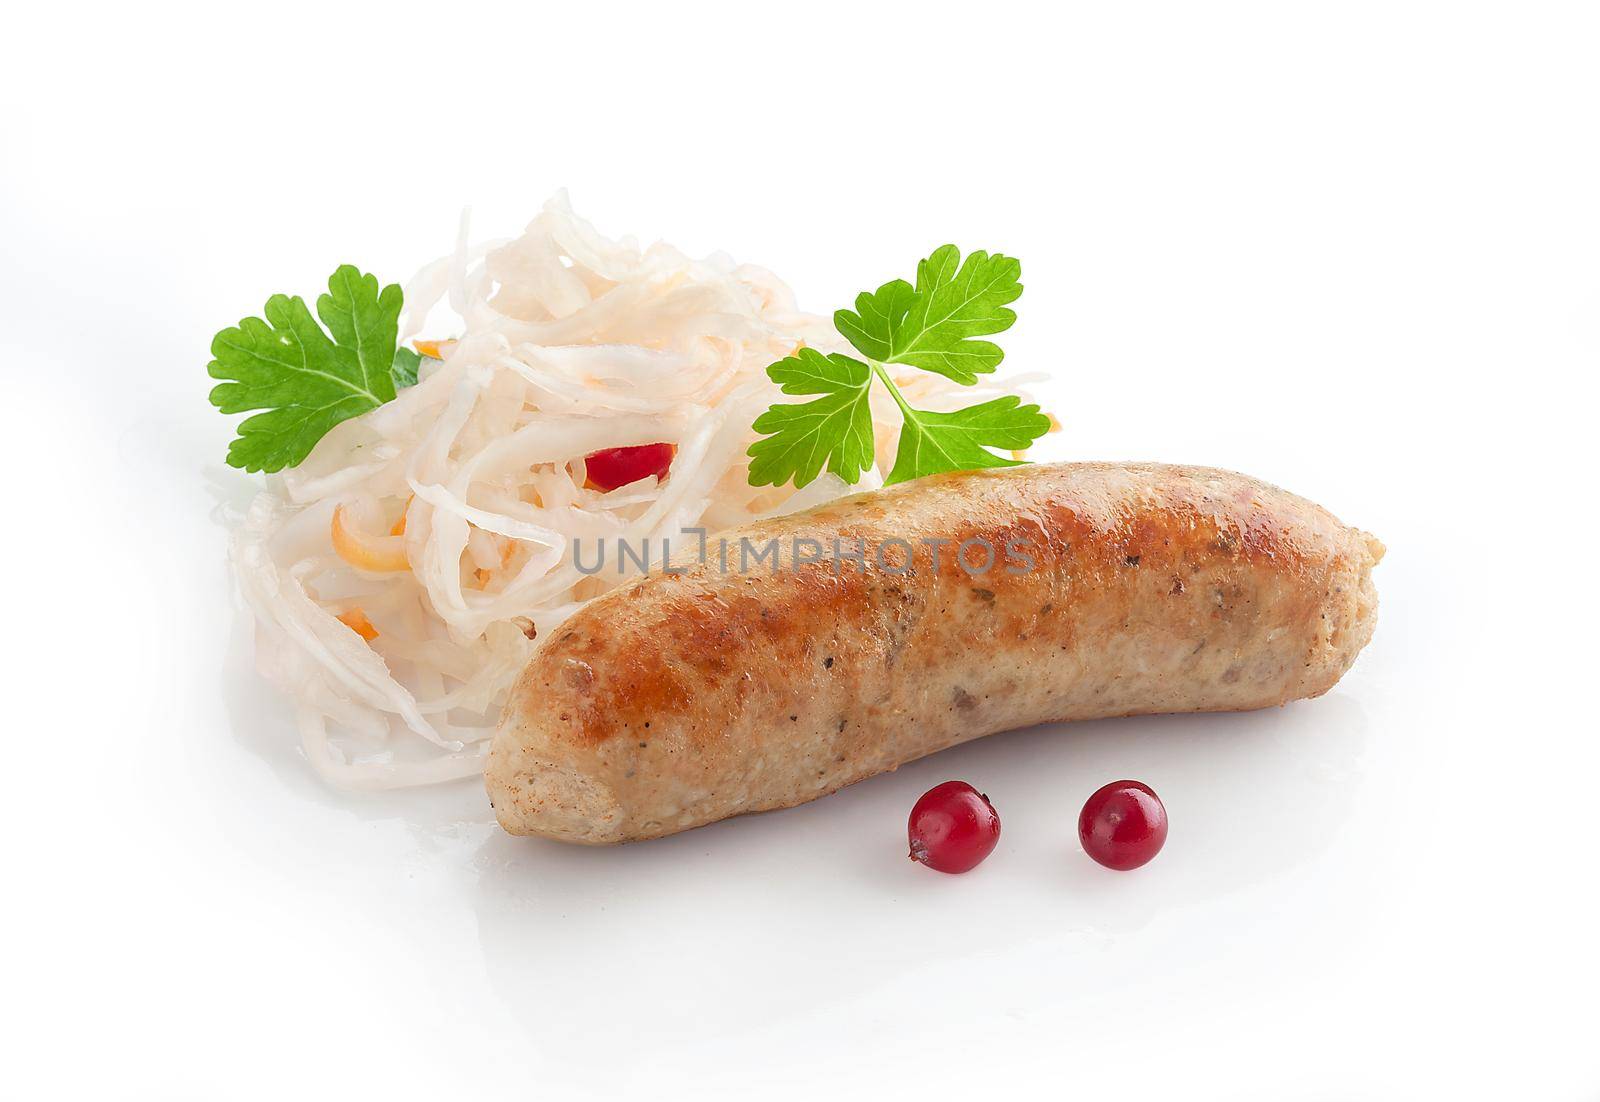 Fried sausage with sauerkraut, cranberry and fresh parsley by Angorius